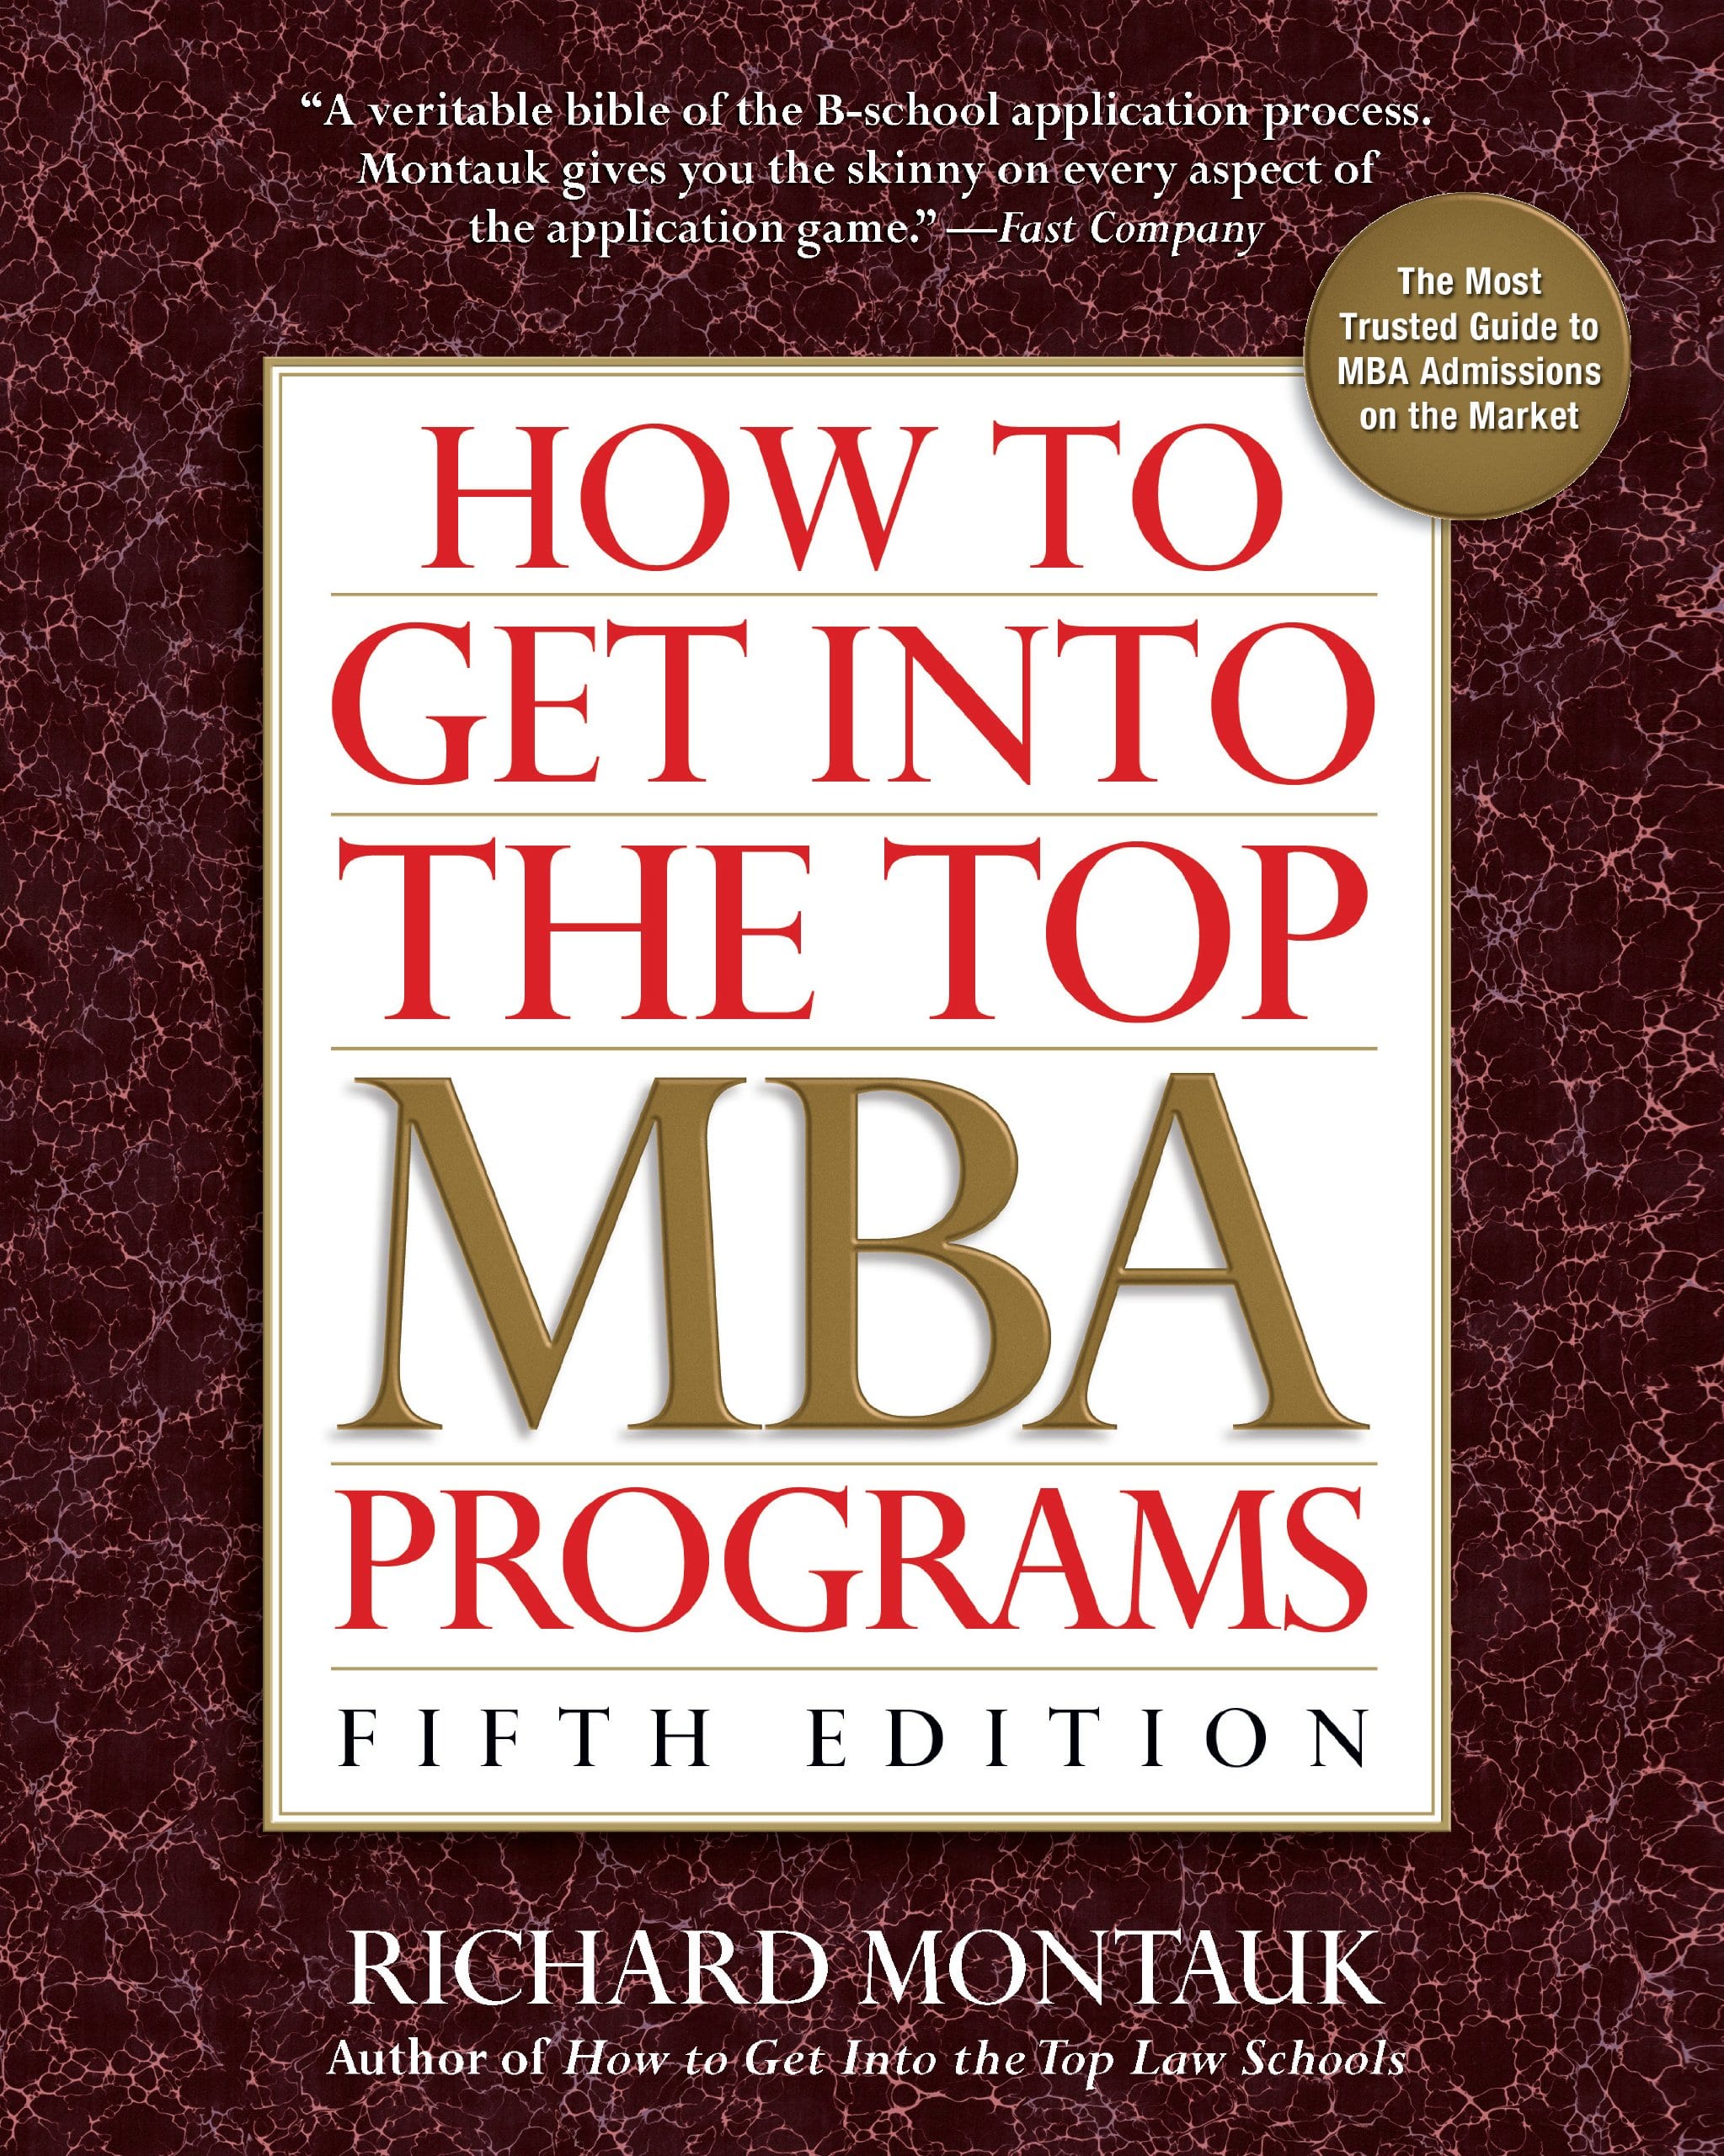 MBA admissions assistance tips